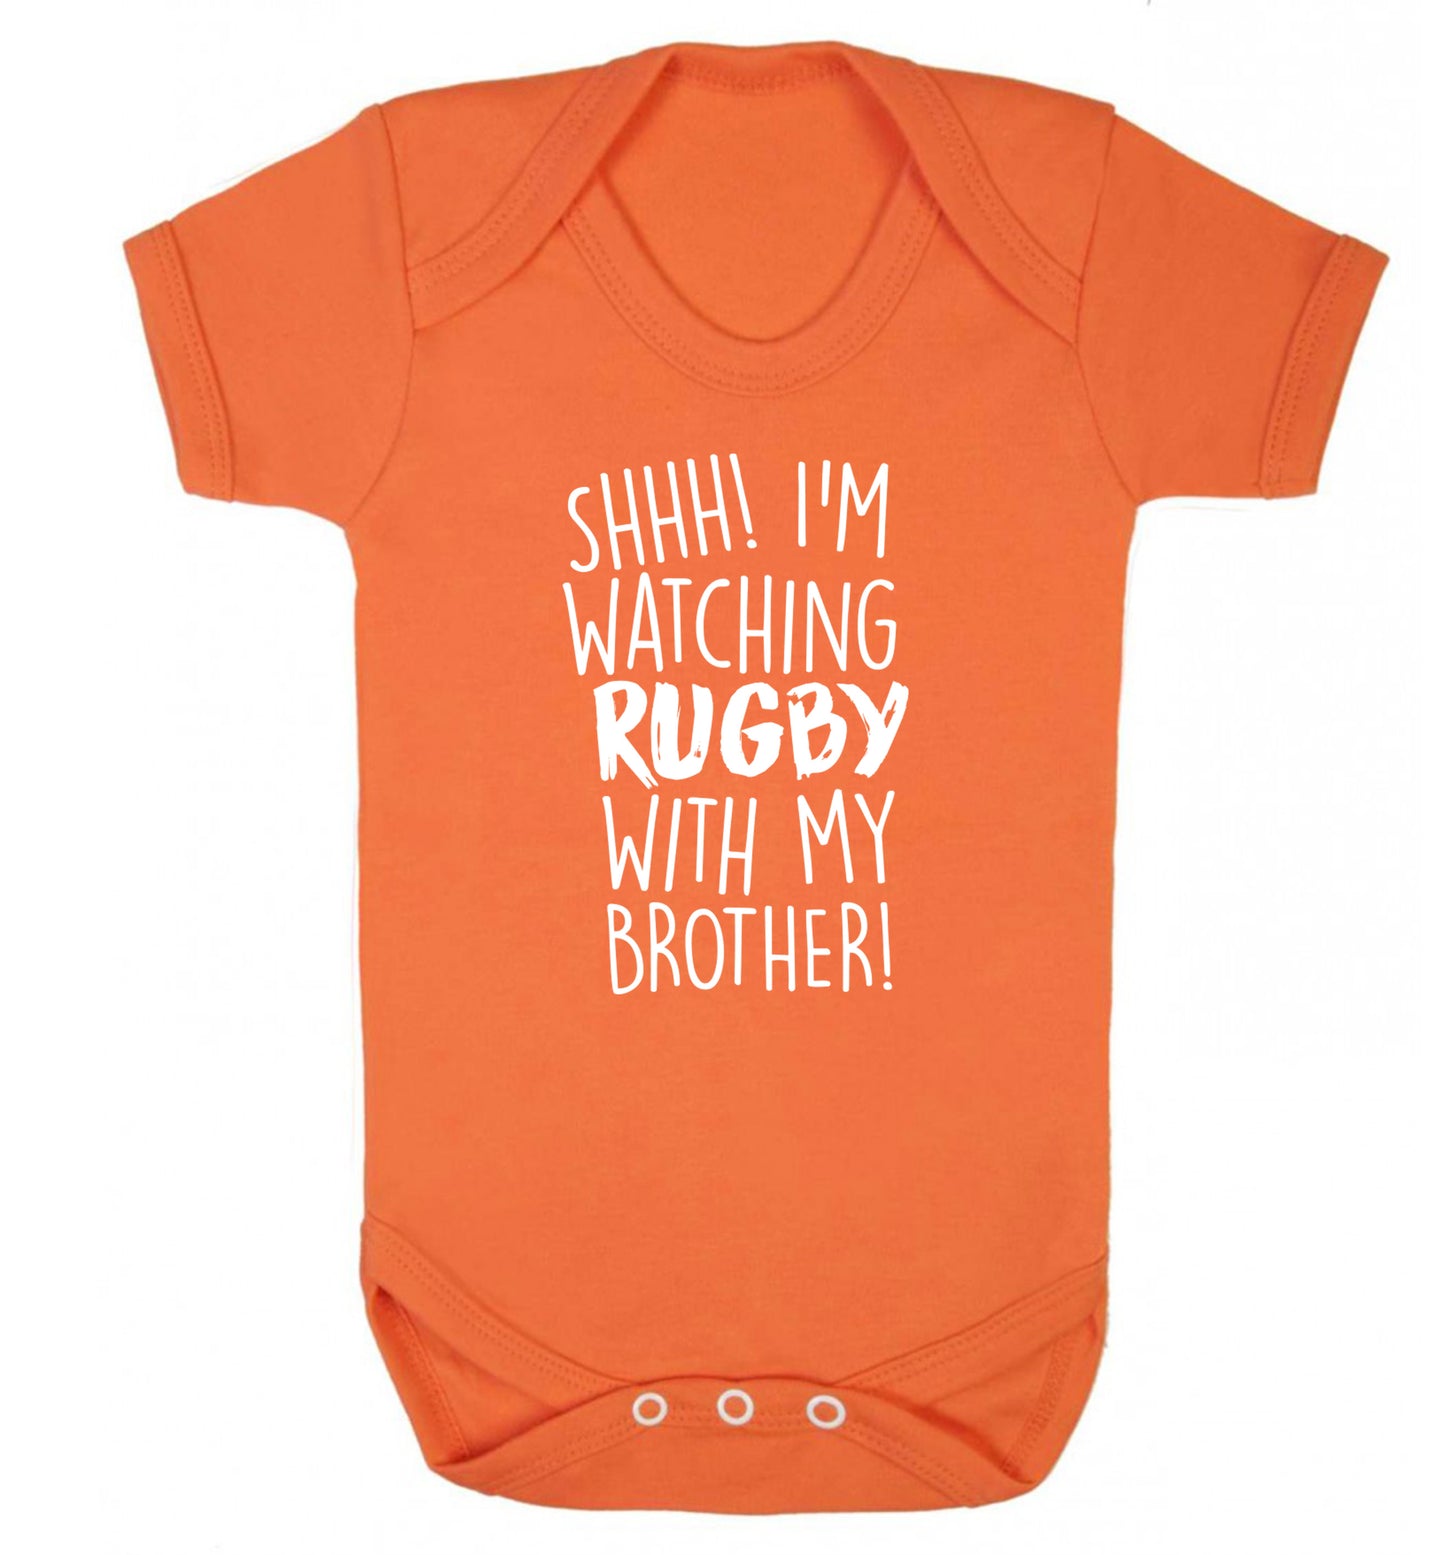 Shh... I'm watching rugby with my brother Baby Vest orange 18-24 months